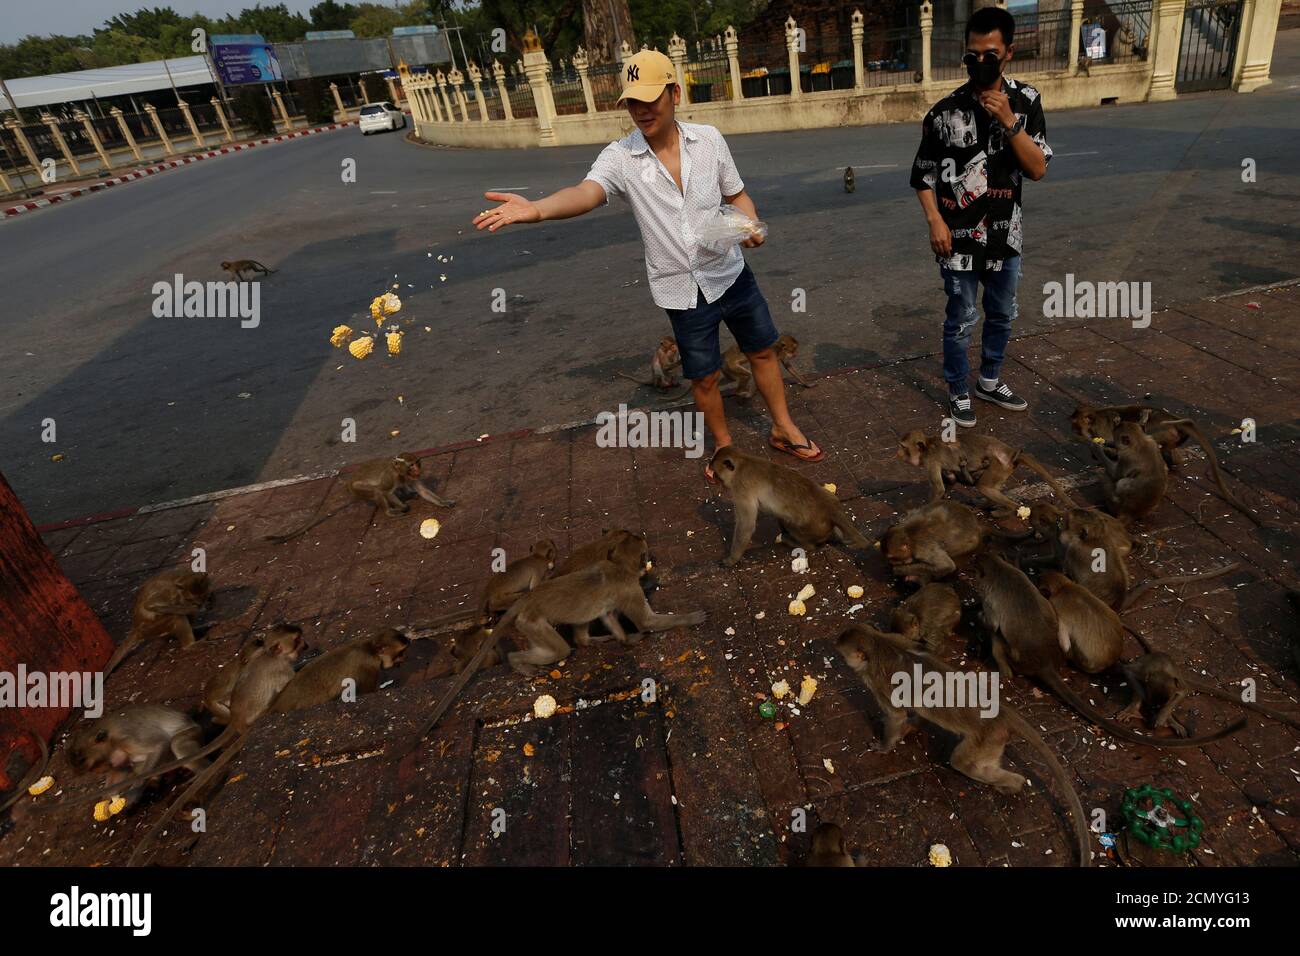 A man feeds monkeys near Prang Sam Yod temple, following significant impact on tourism after the outbreak of coronavirus disease 2019 (COVID-19) spread, in Lopburi, Thailand, March 18, 2020. Picture taken March 18, 2020. REUTERS/Soe Zeya Tun Stock Photo